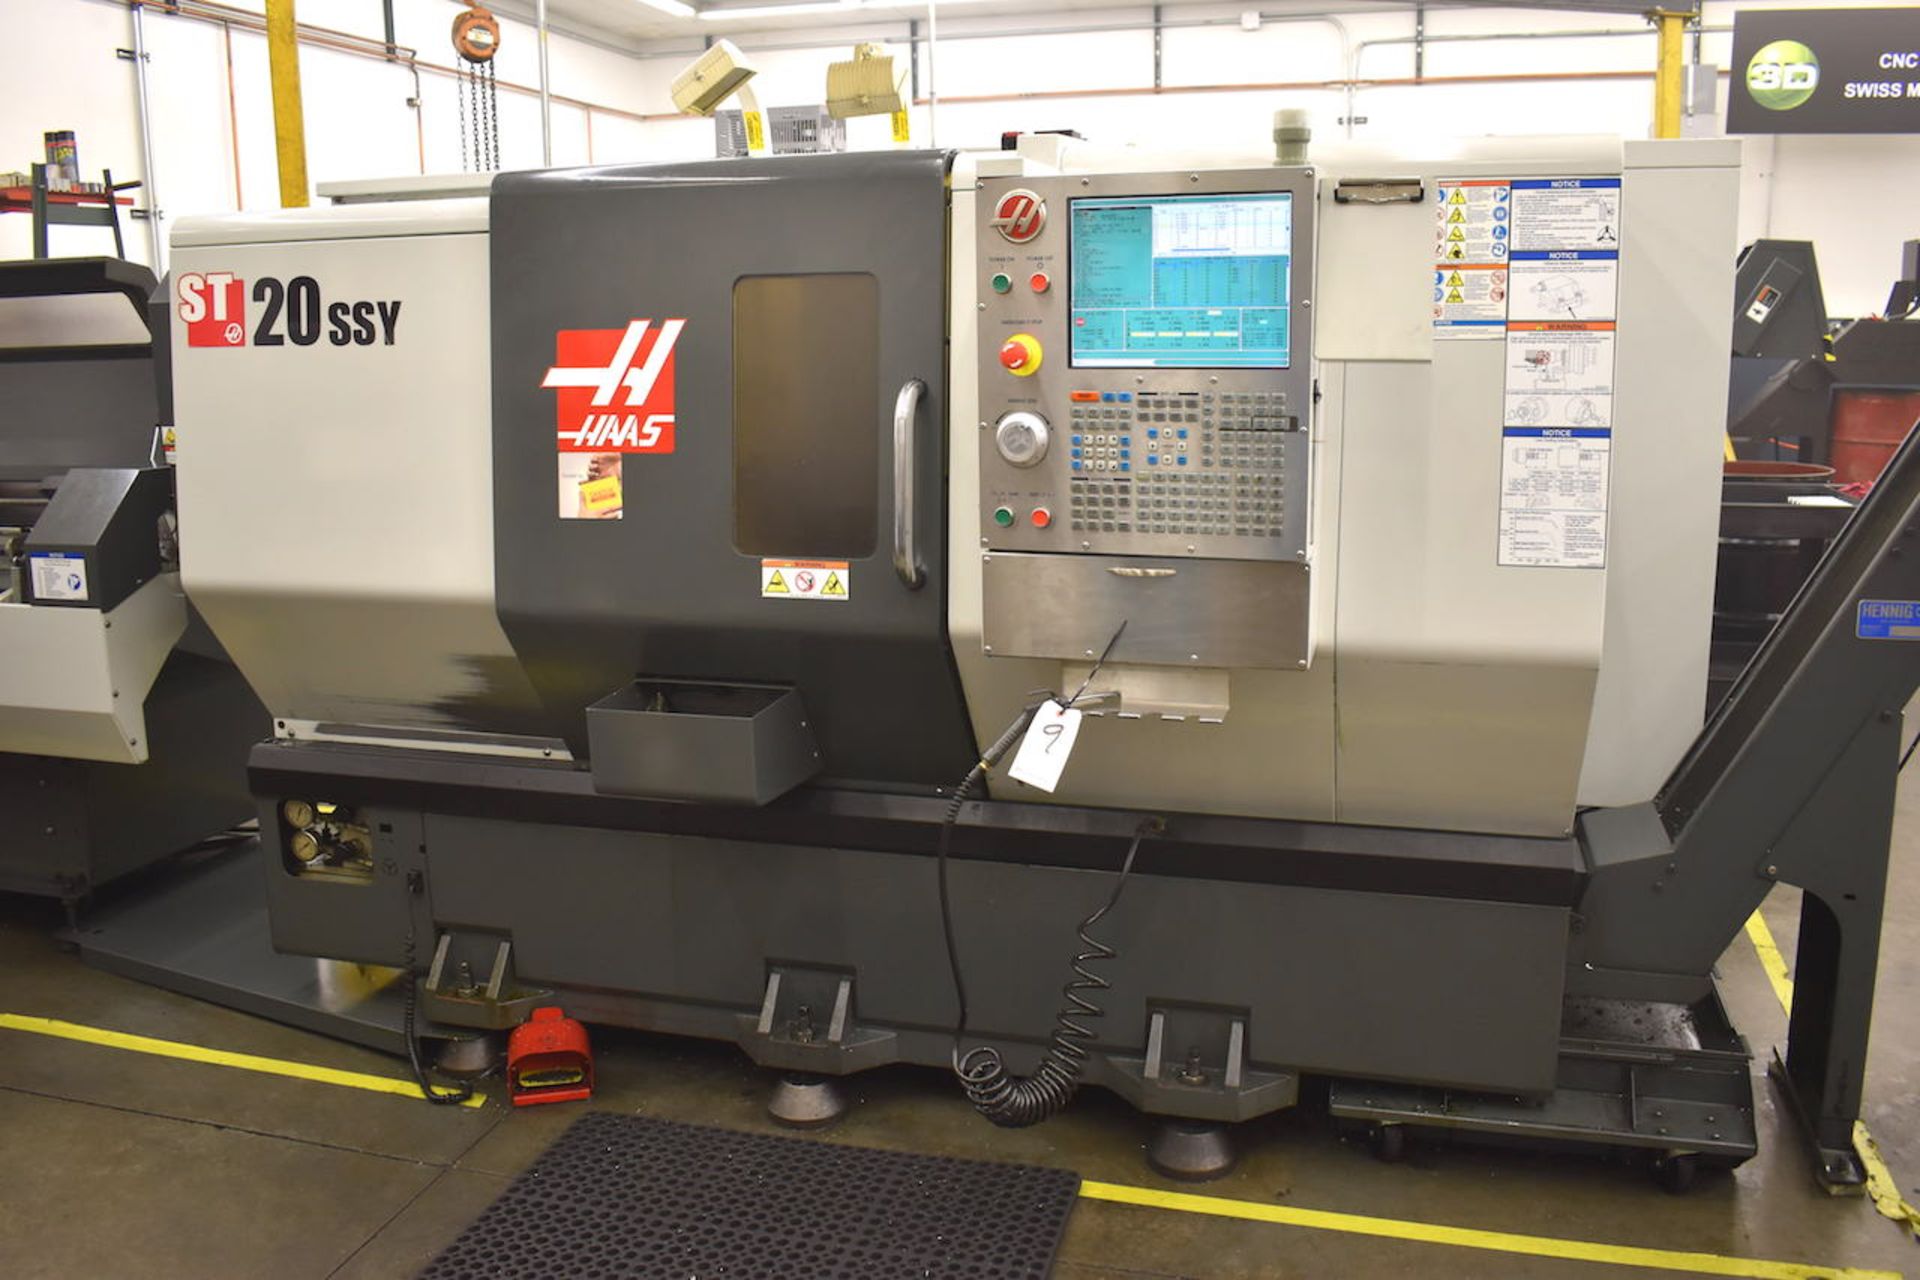 2010 HAAS MODEL ST20SSY CNC LATHE: S/N 3086382, - Image 10 of 10